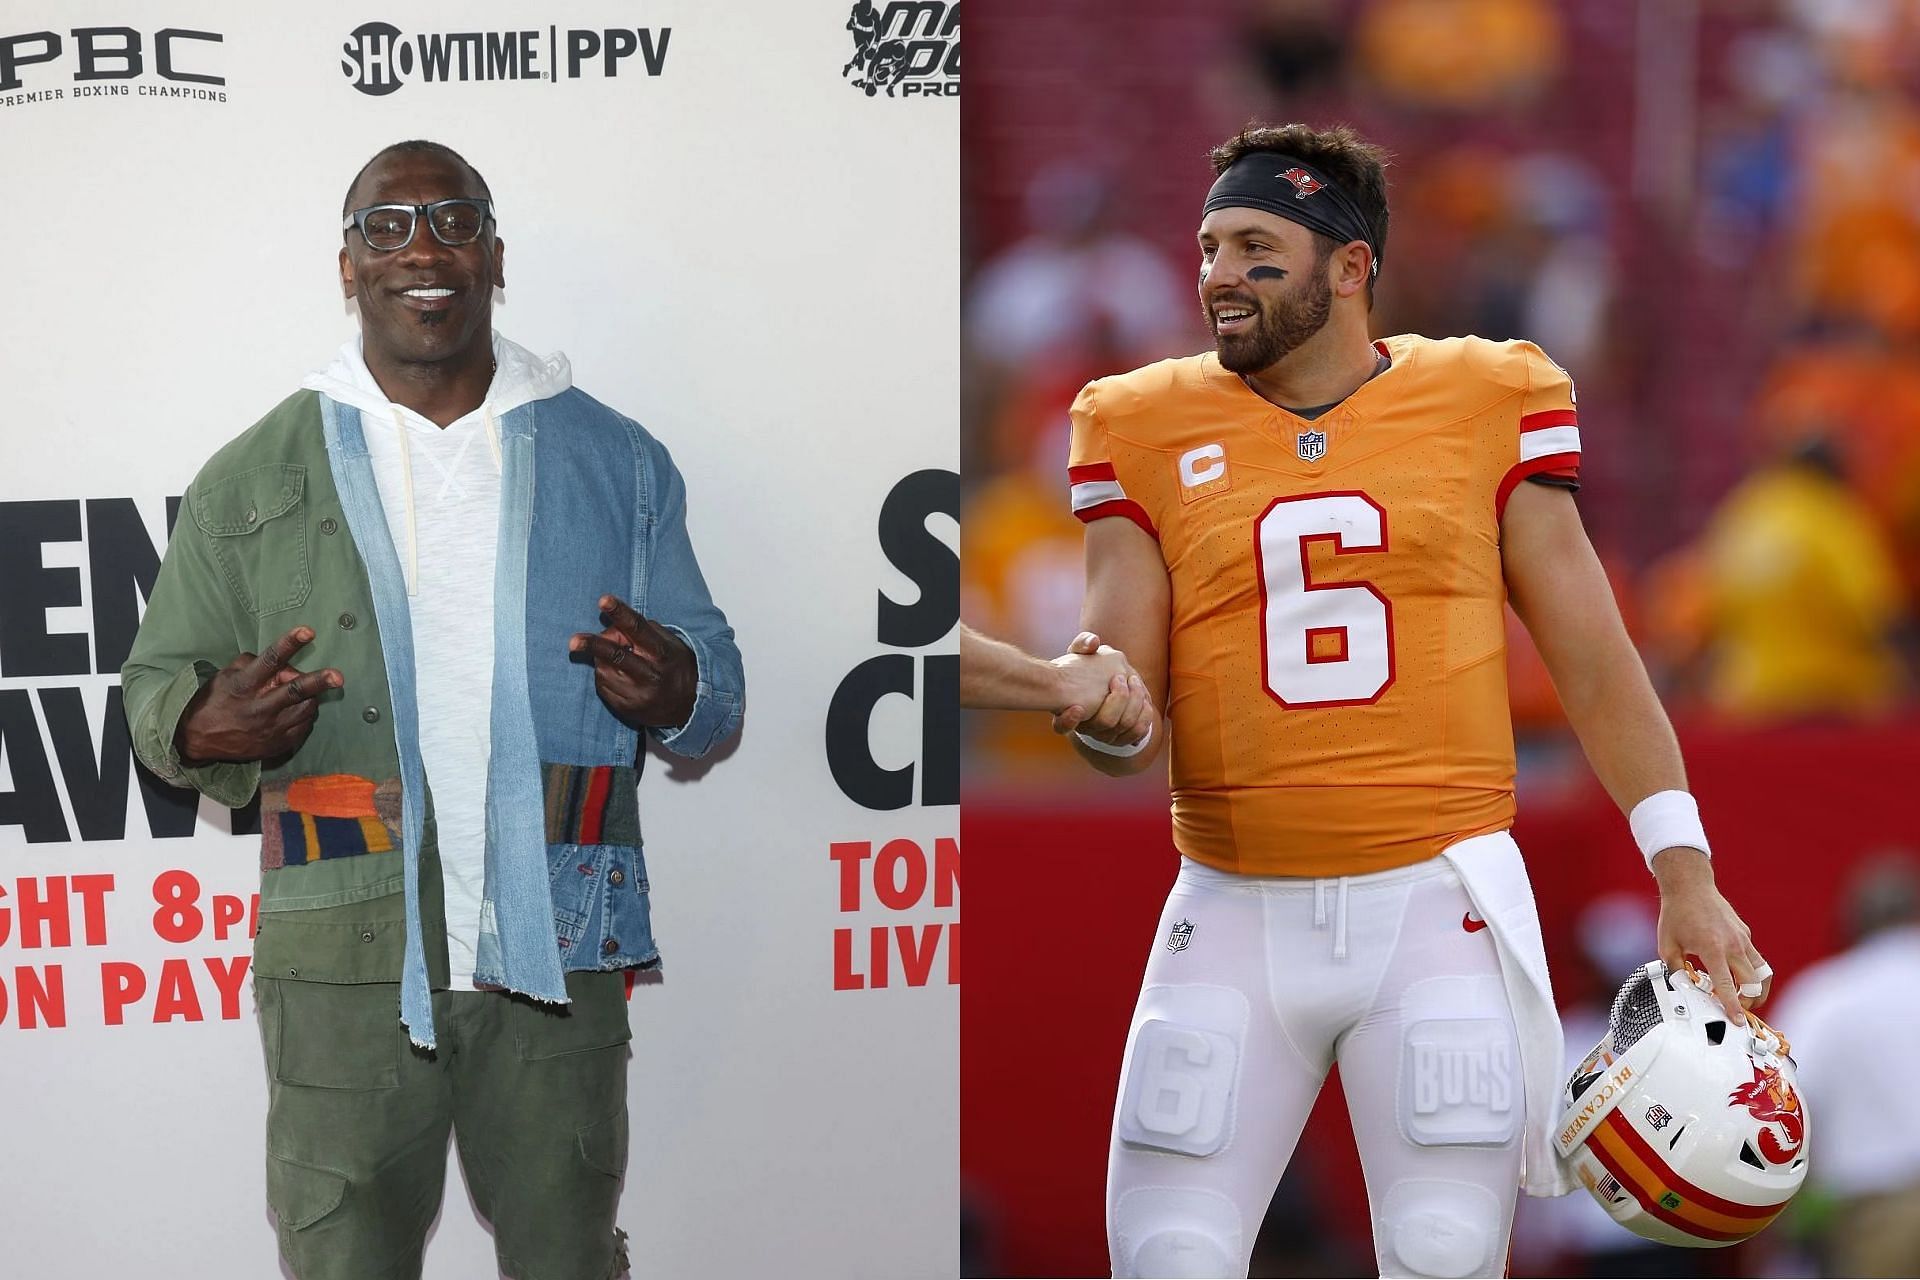 Shannon Sharpe rips Baker Mayfield after Buccaneers